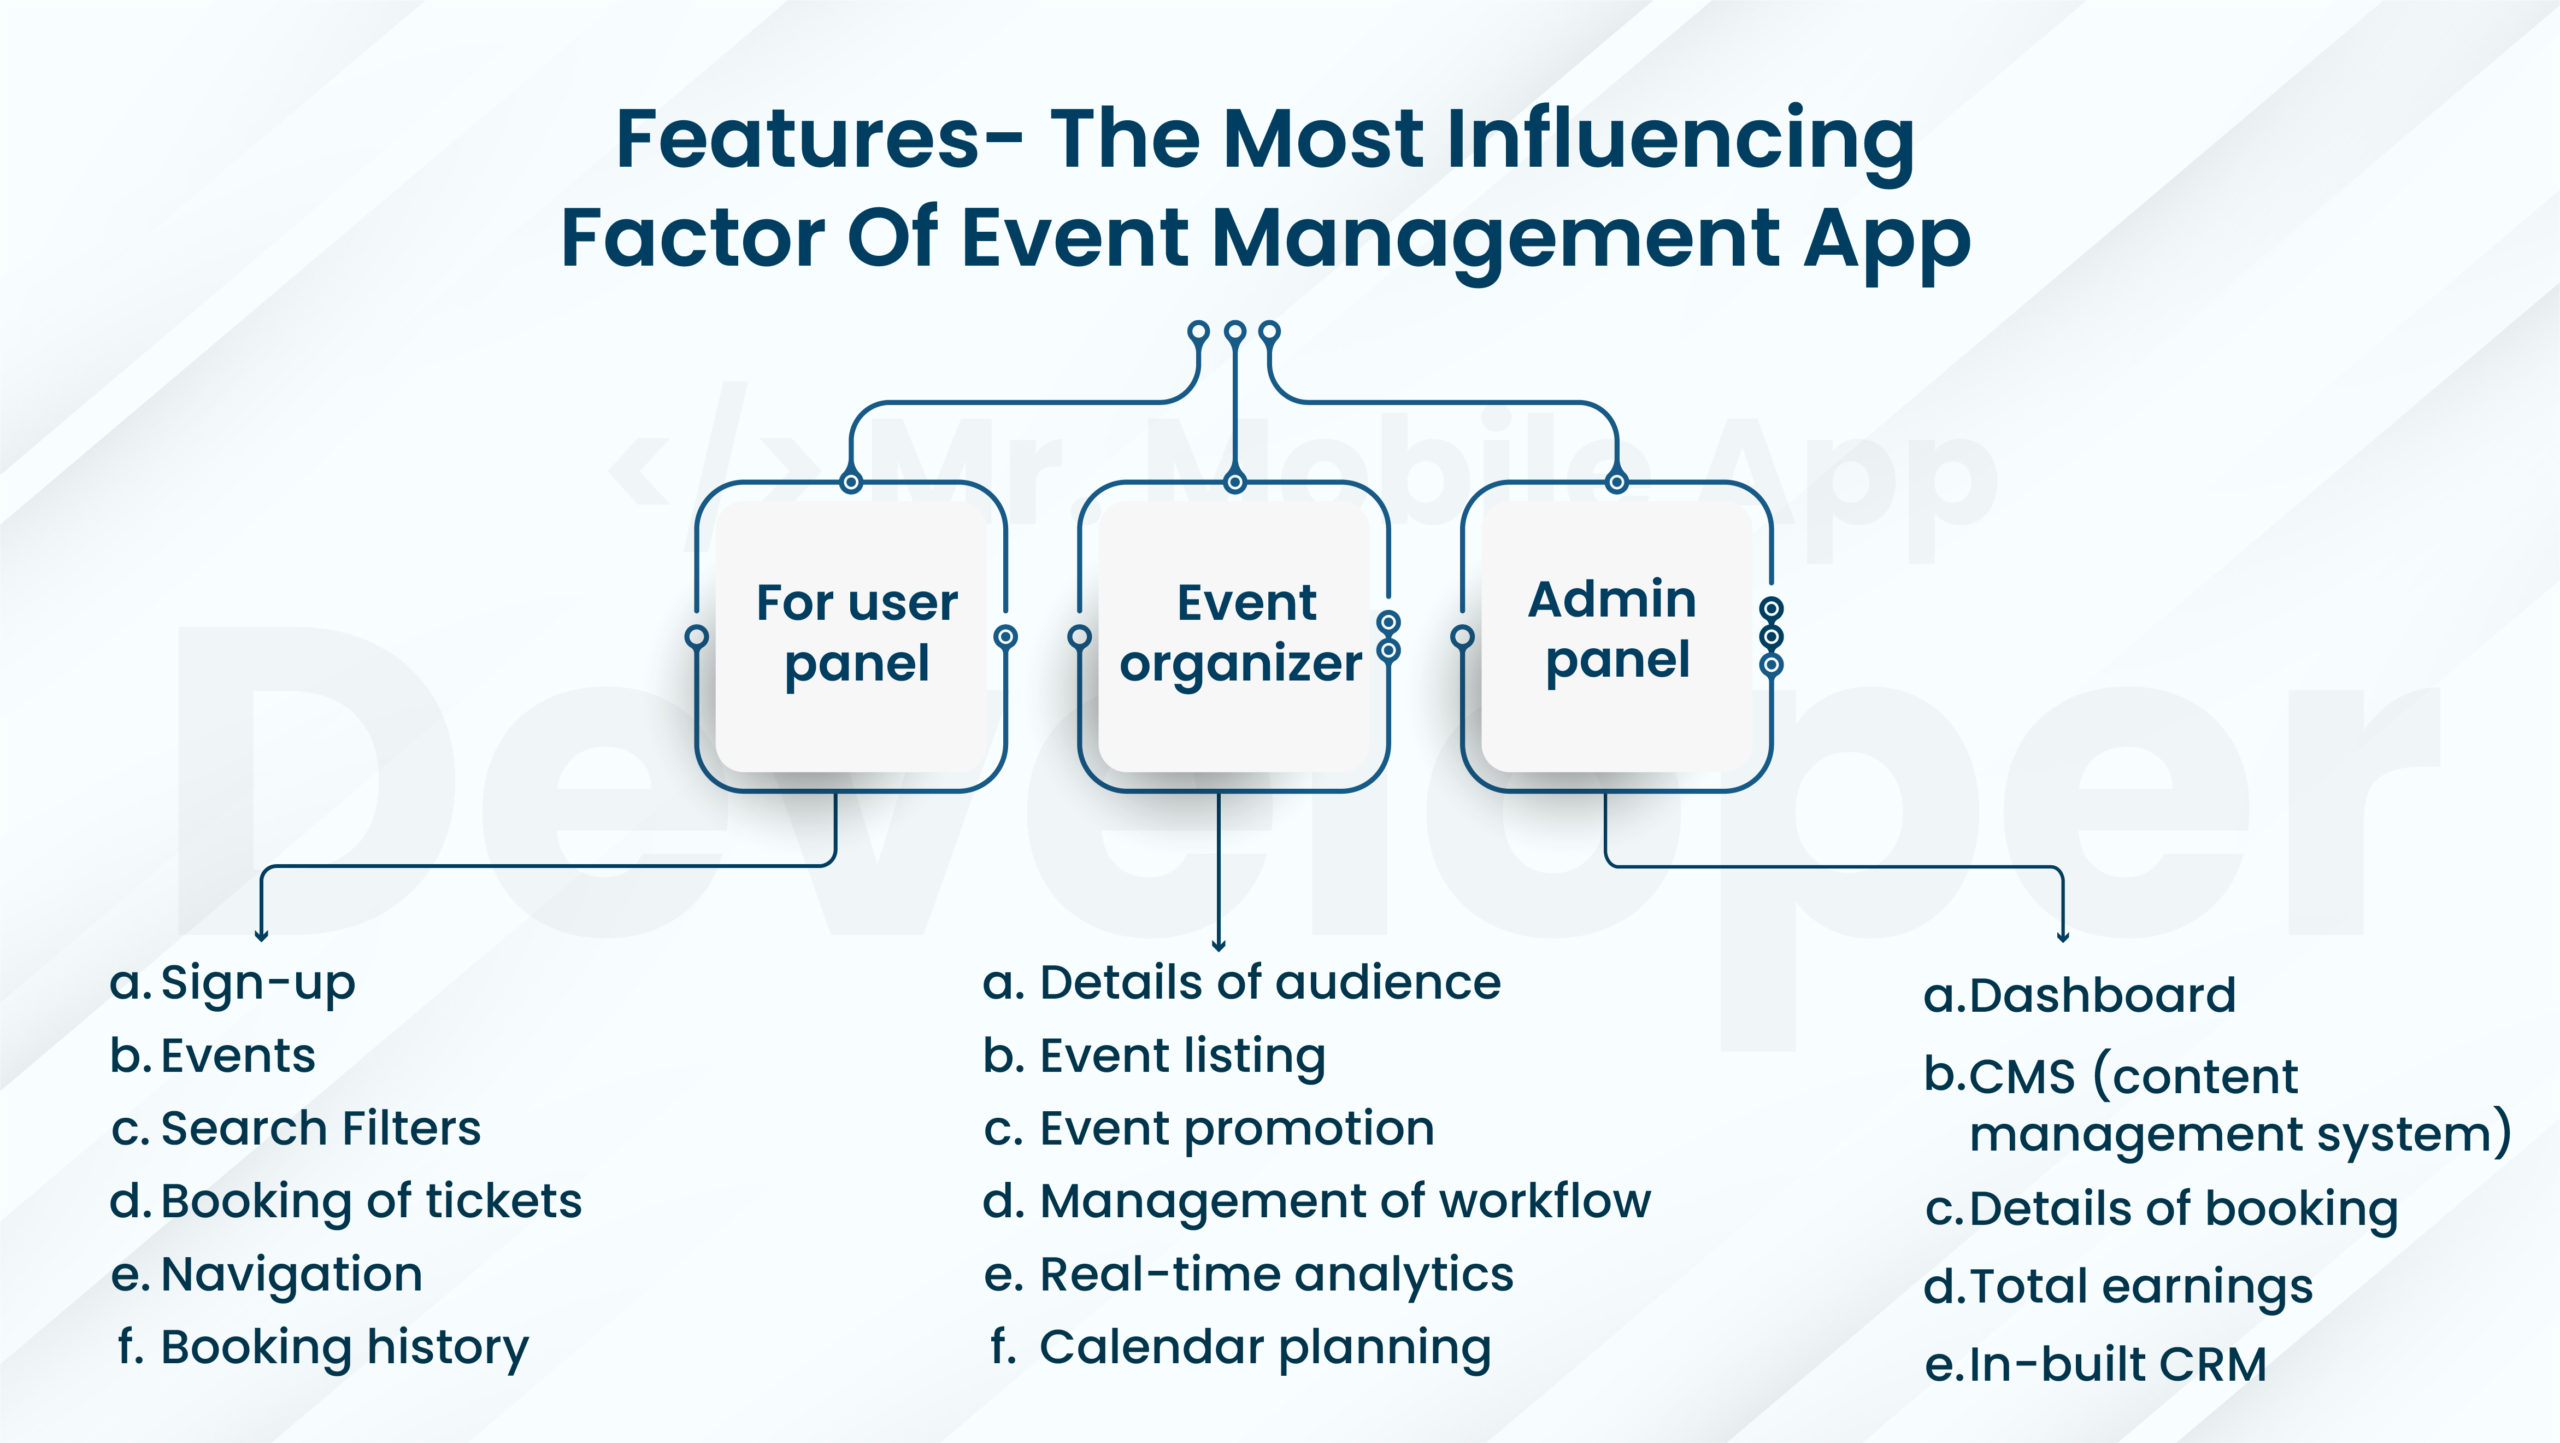 Features- The Most Influencing Factor Of Event Management App